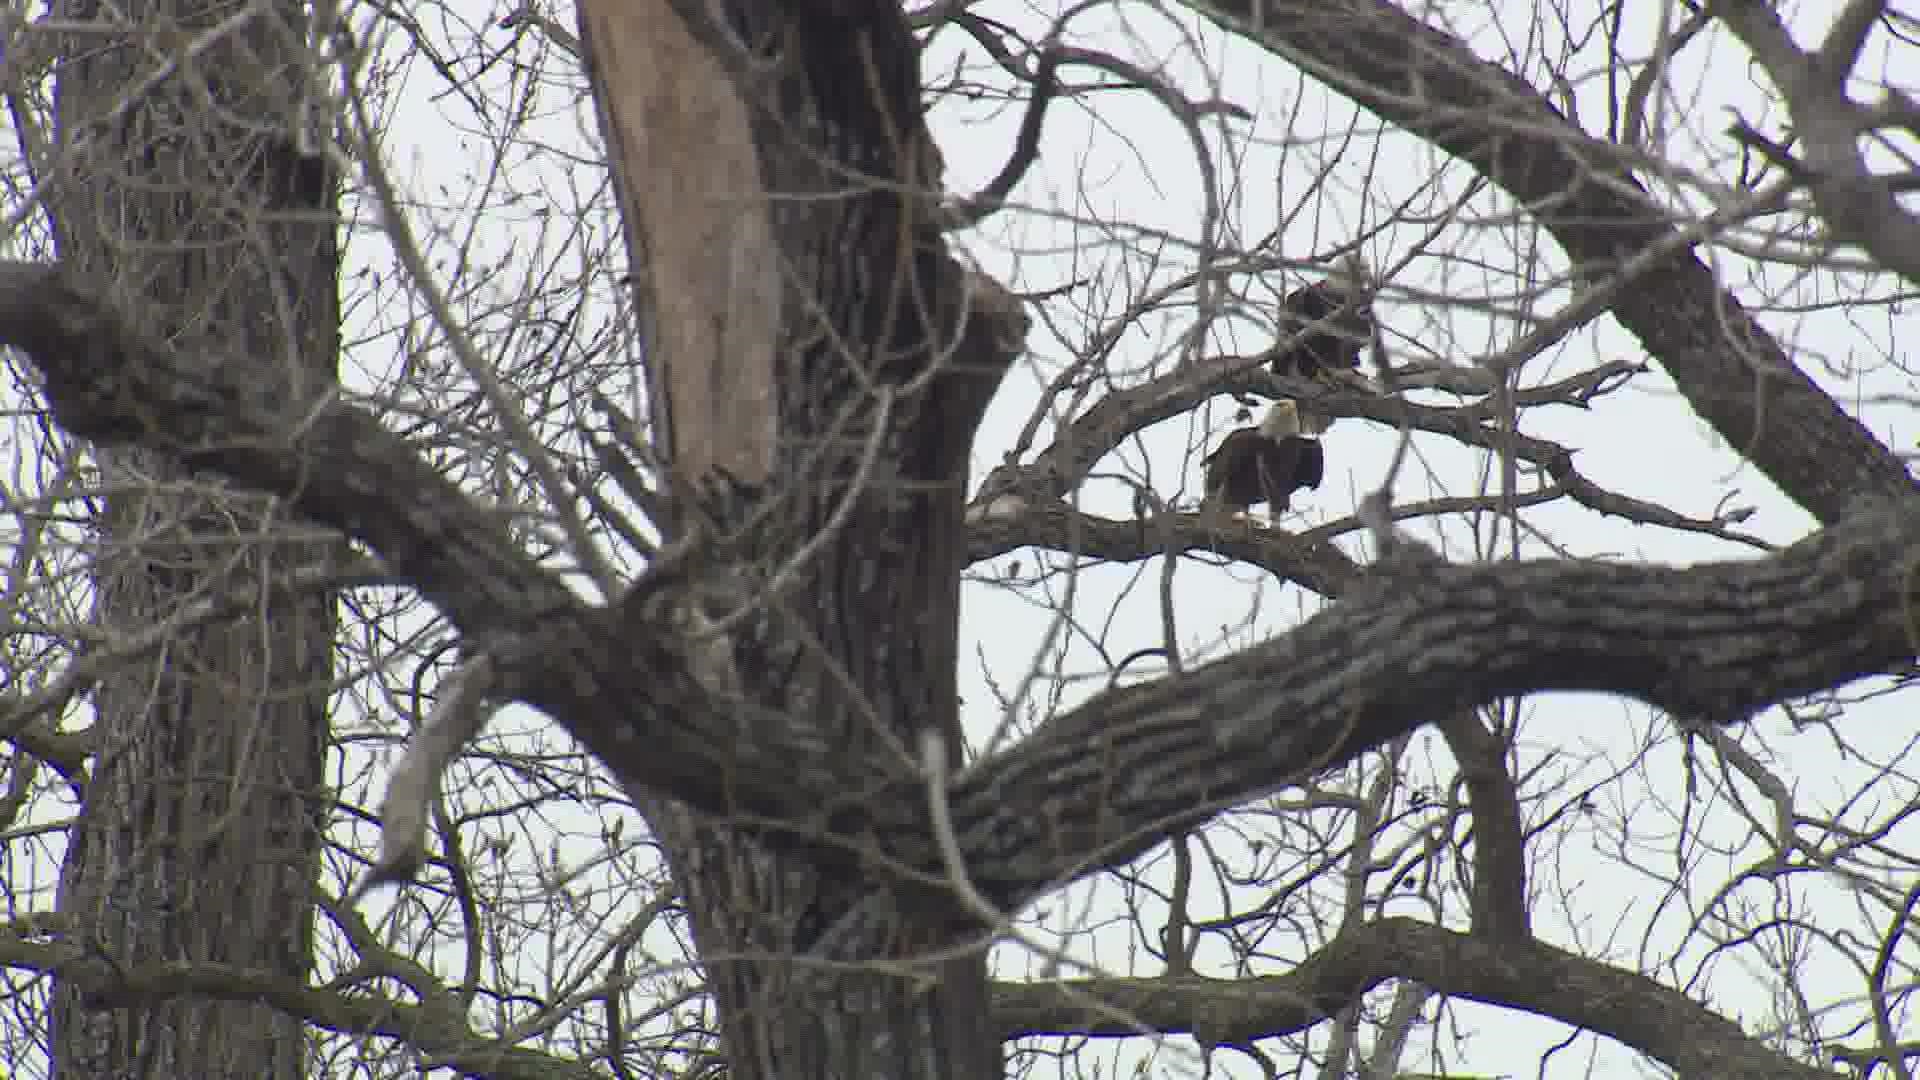 The nest of two bald eagles on the east side of White Rock Lake fell when a branch broke in windy conditions around 4 p.m. Tuesday, city officials said.